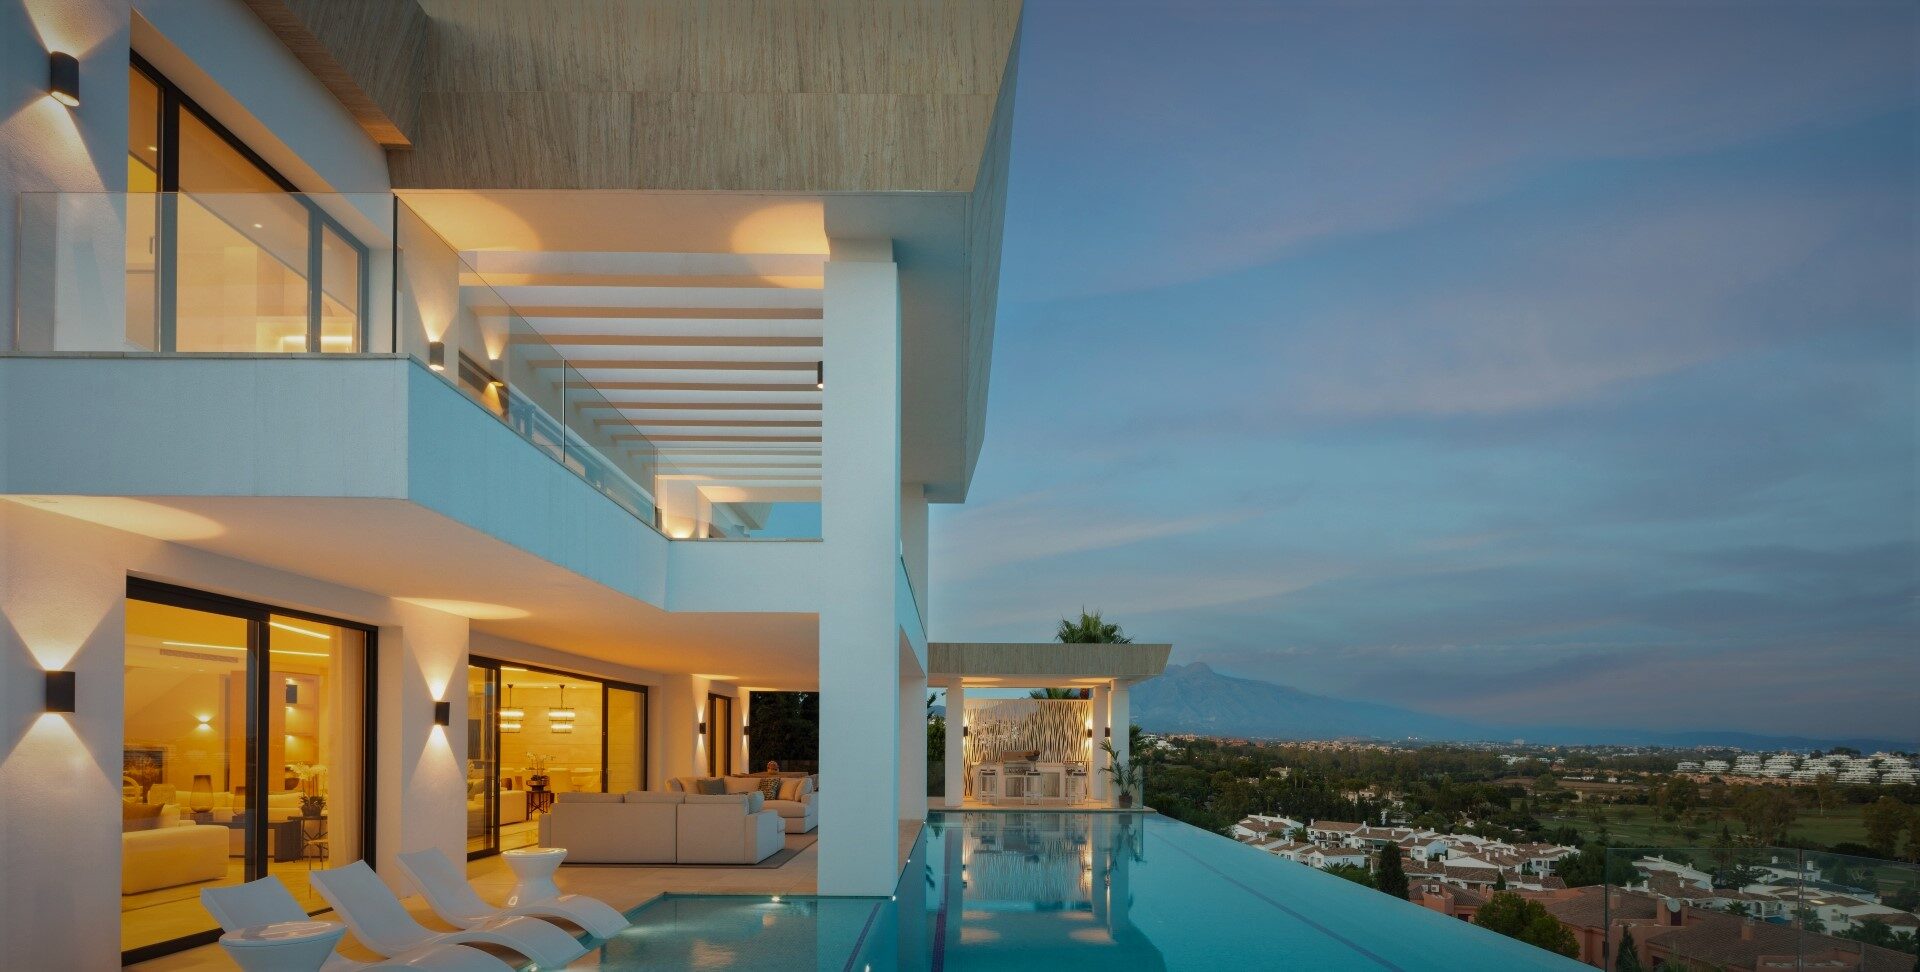 Modern villa with breathtaking panoramic views of the coast and the Mediterranean